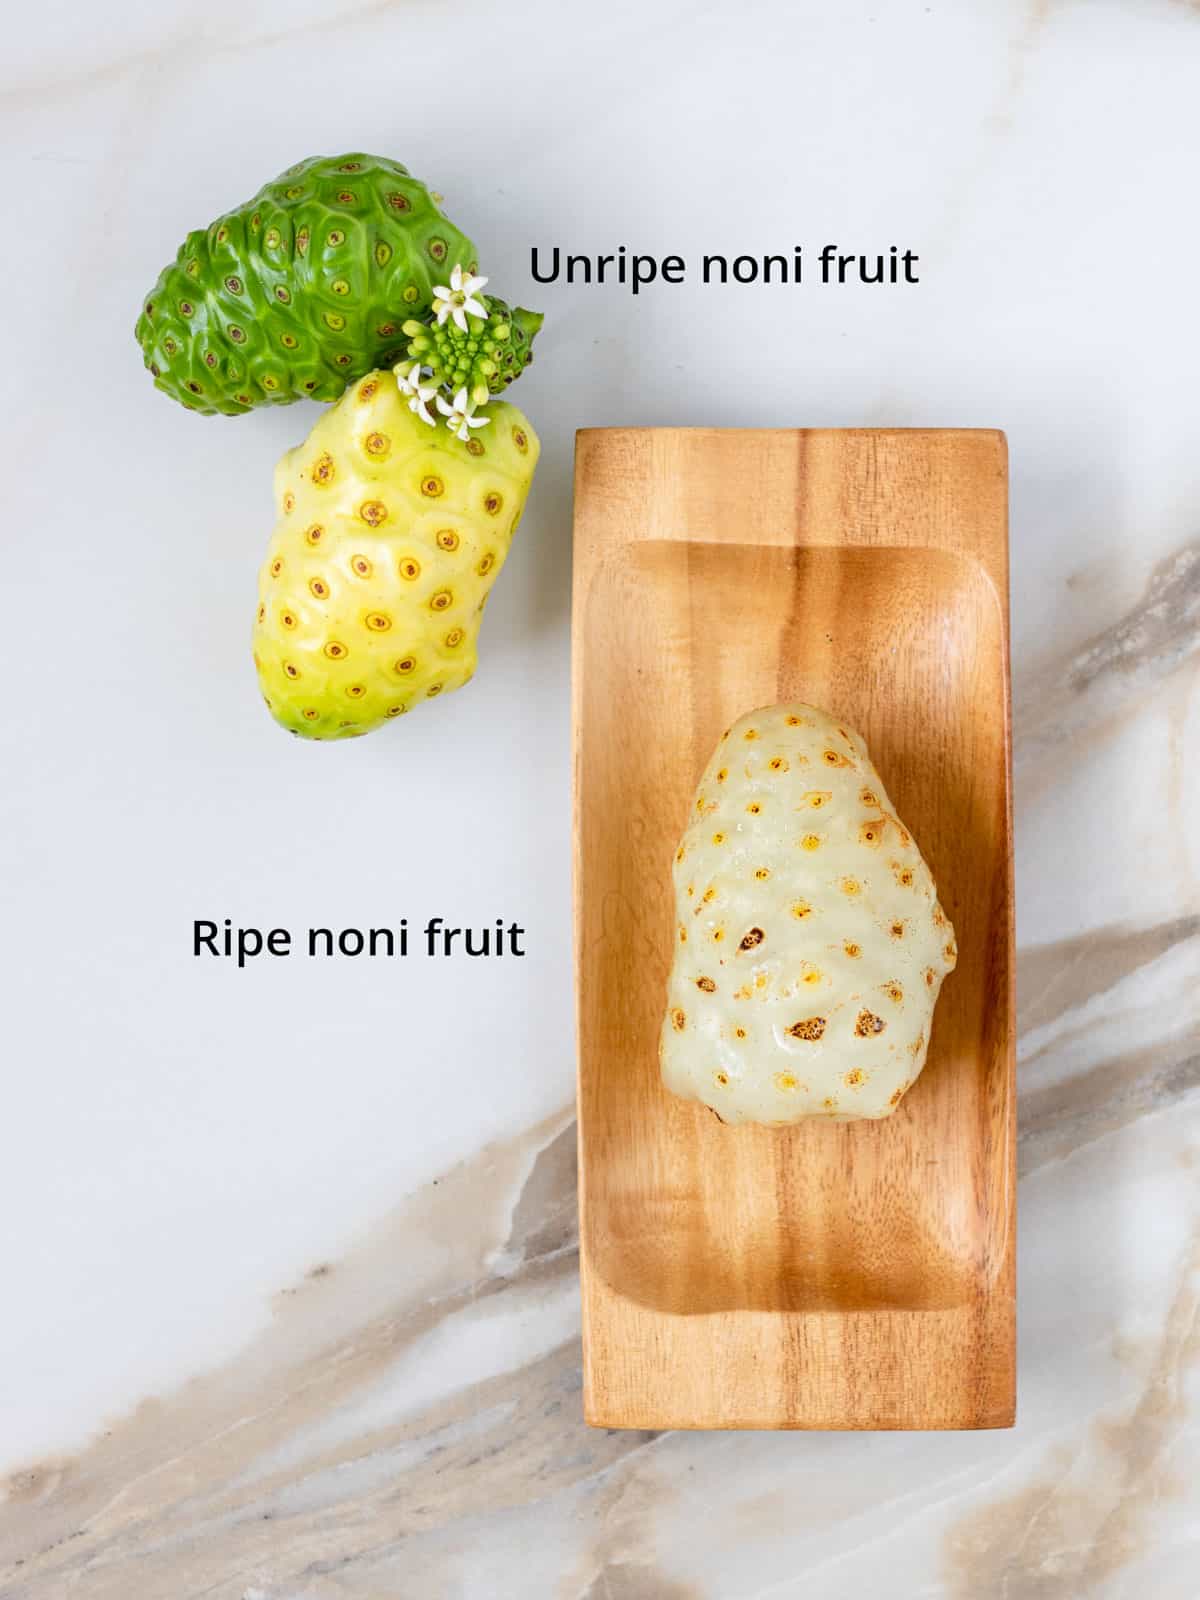 labeled display of ripe and unripe fruit.